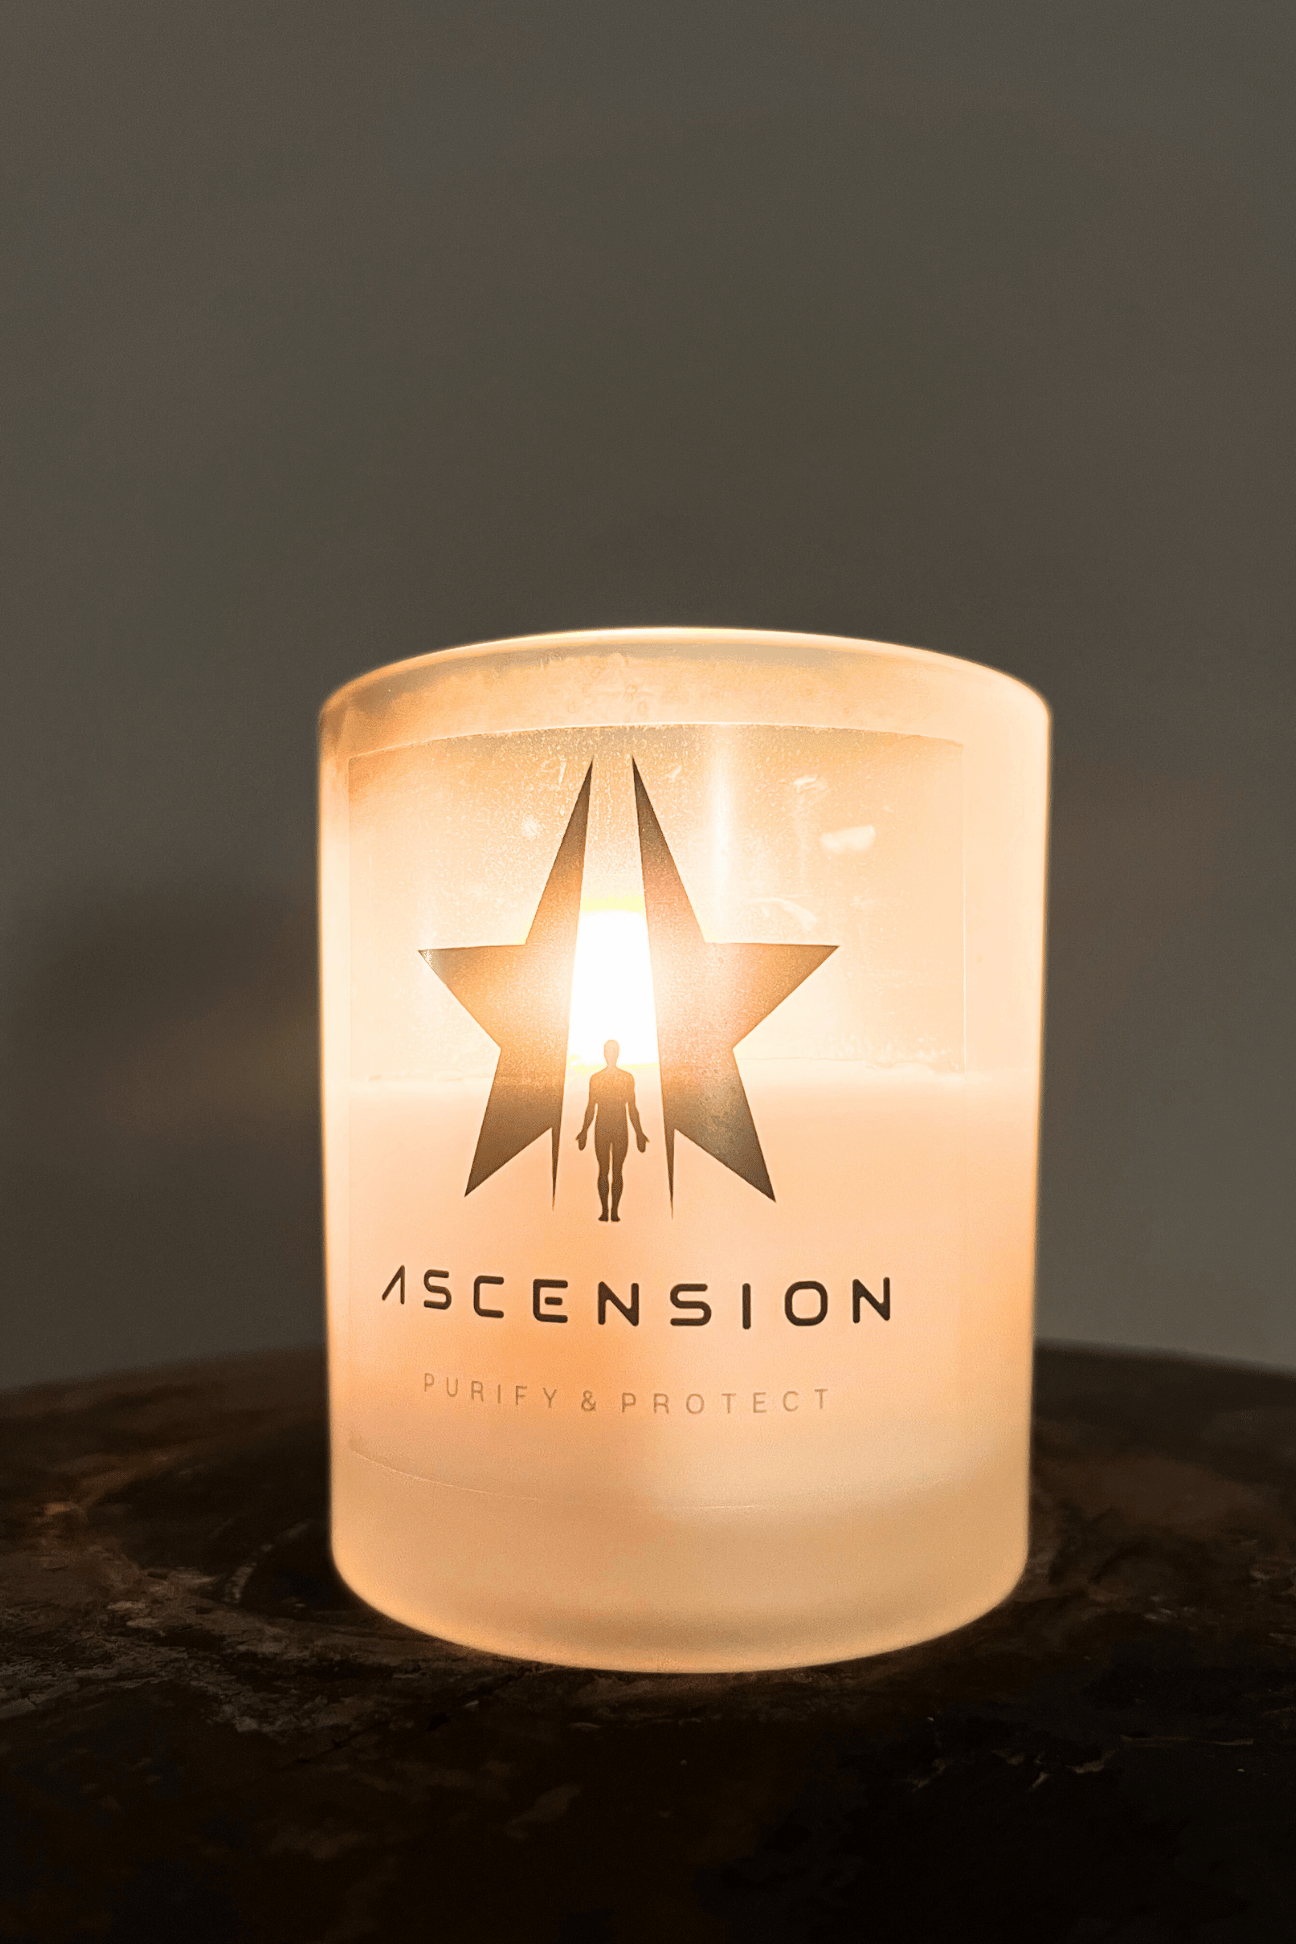 A Galactic Federation of Light ASCENSION Candle in a glass jar, exuding an ambiance of calmness, with the word 